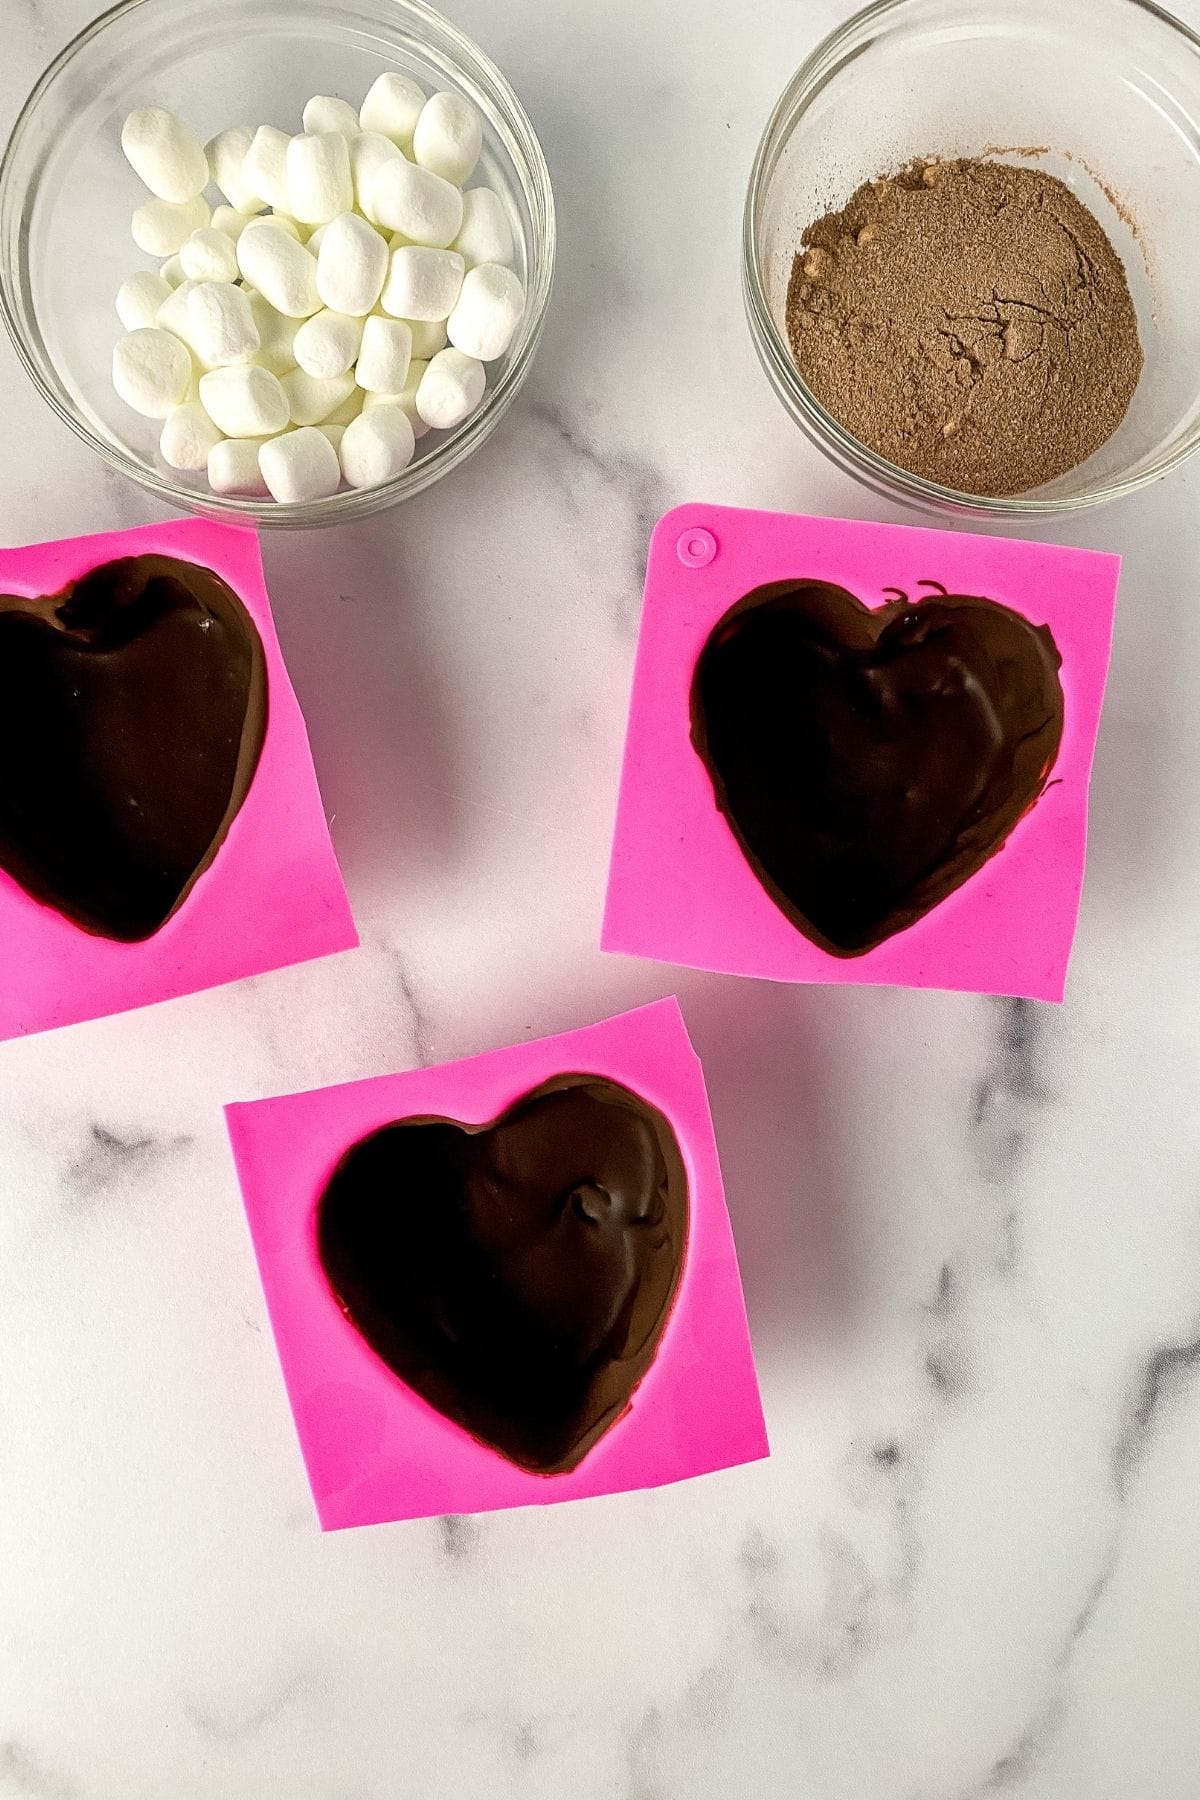 Chocolate in heart mold